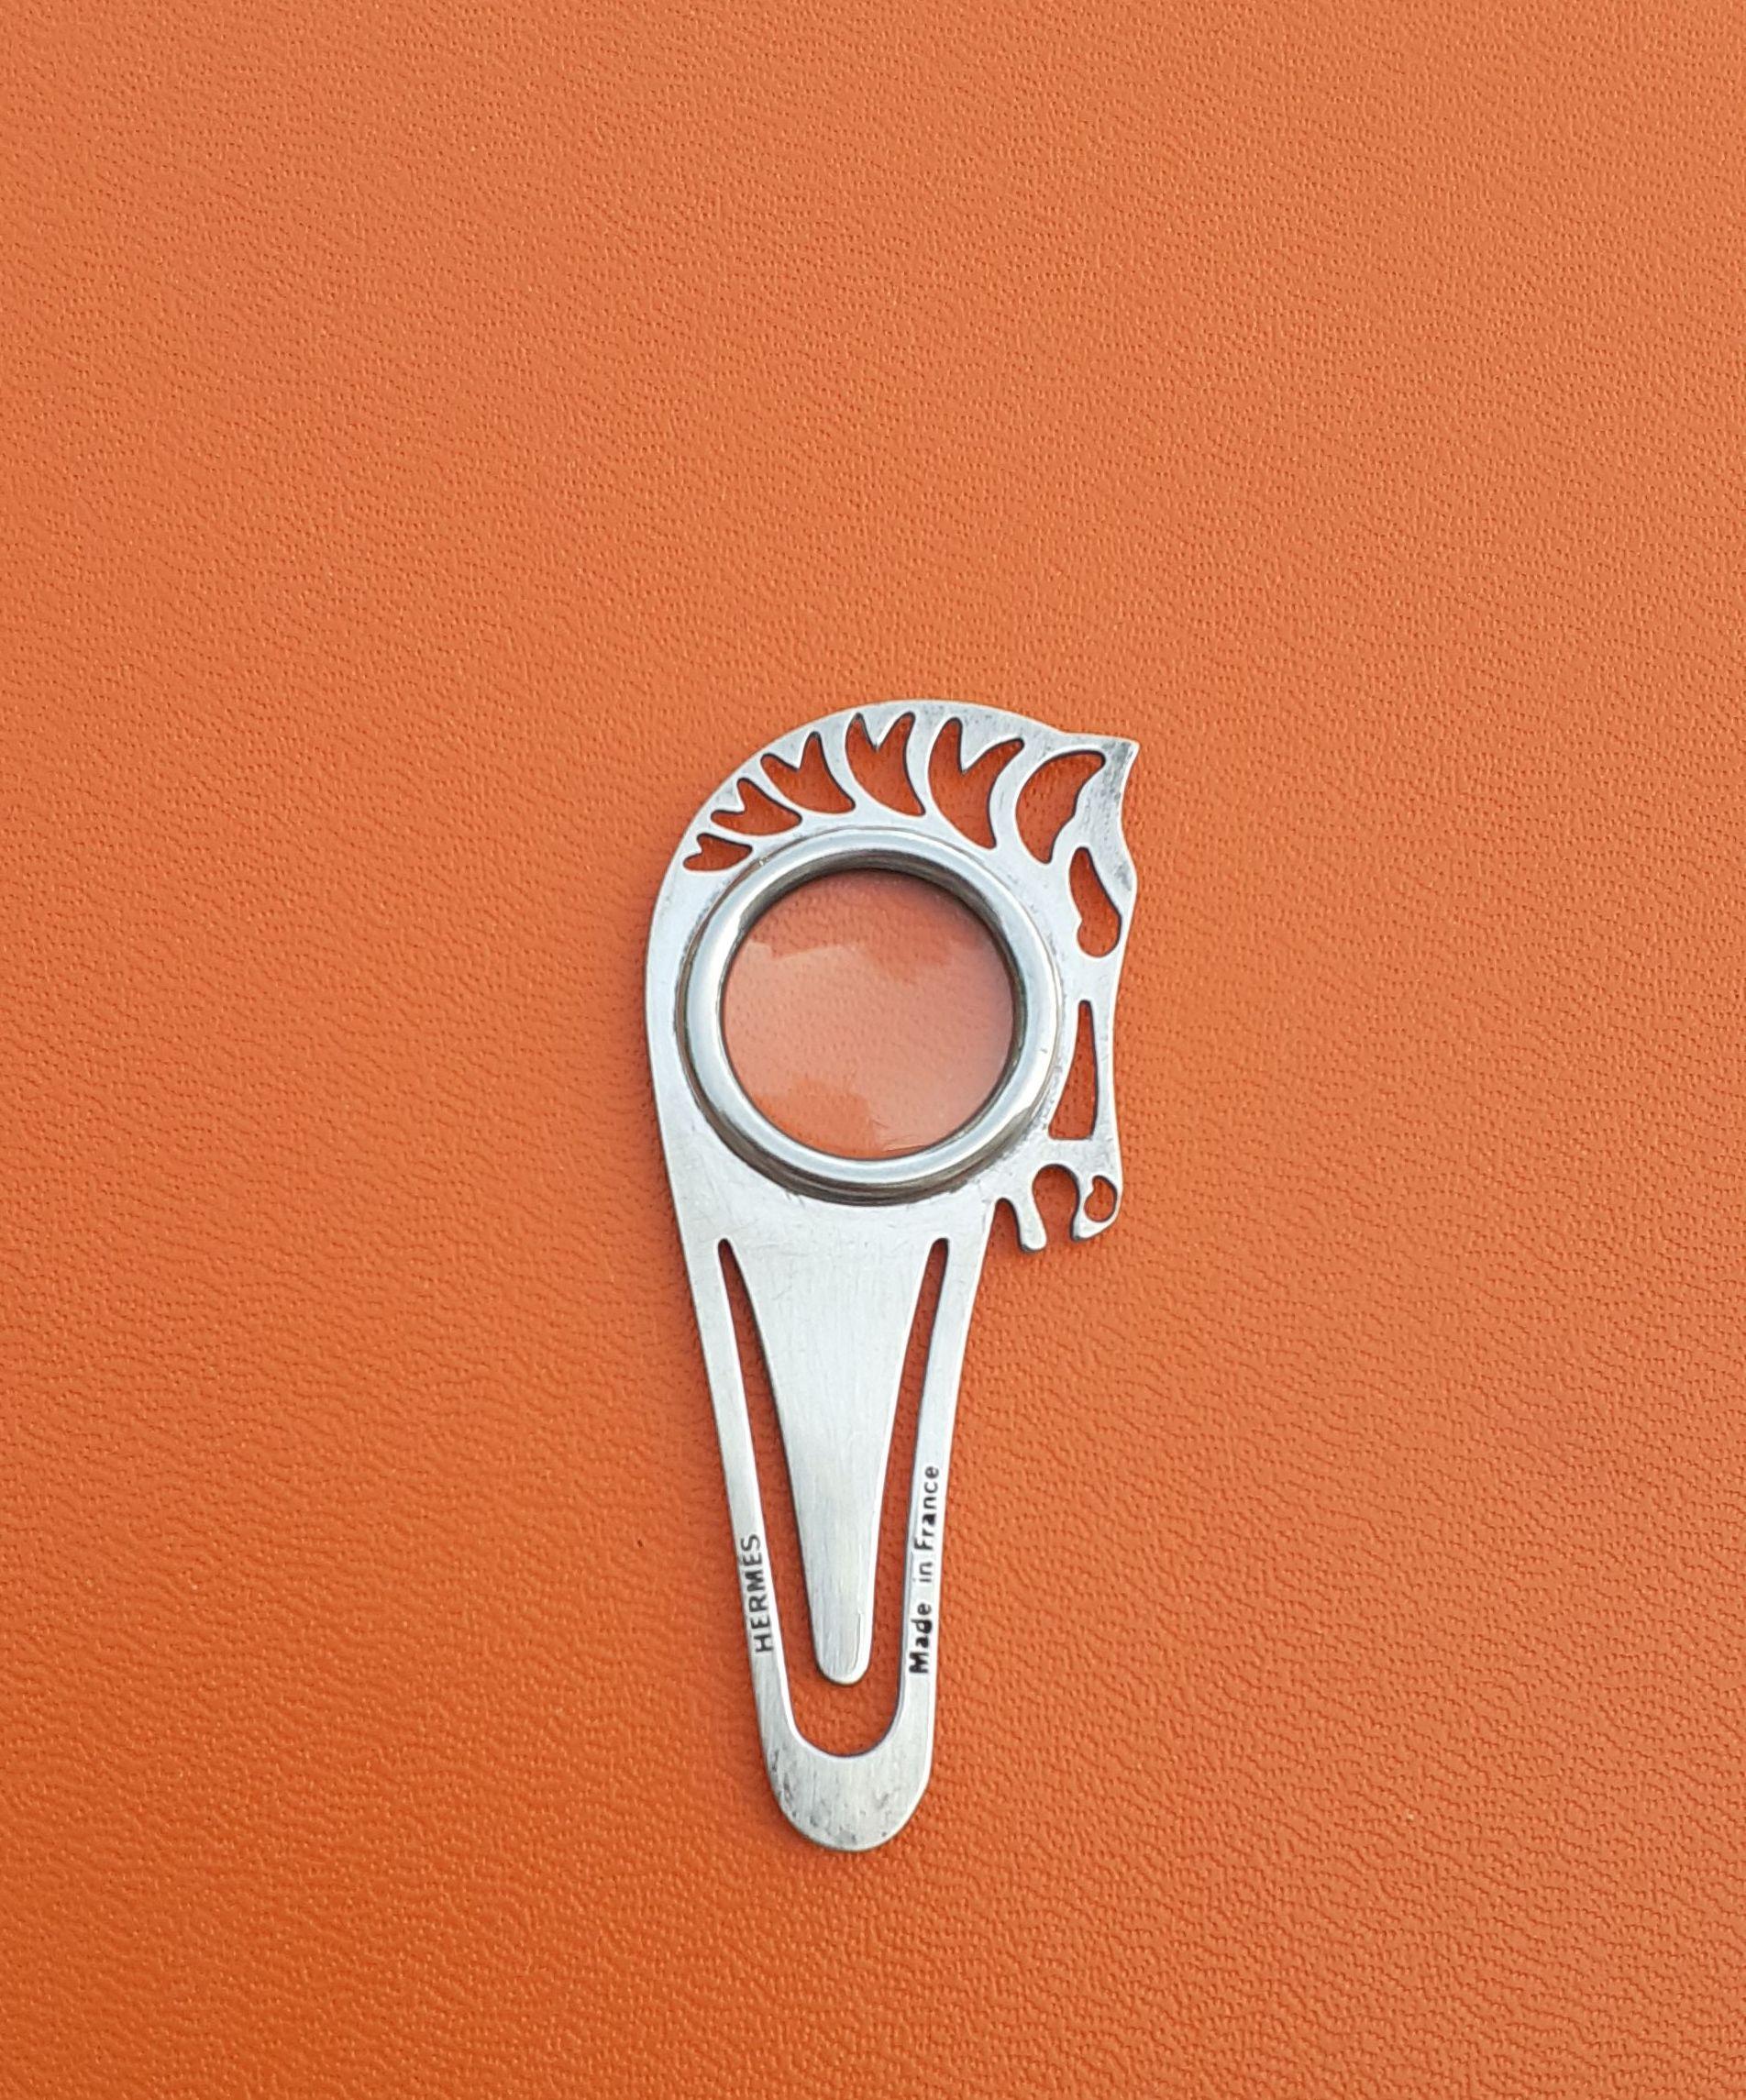 Rare Authentic Hermès 3 functions item:

- paperclip
- magnifying glass
- bookmark

Works on both sides

Shaped as horse head

Made of Silvered metal (not precious)

